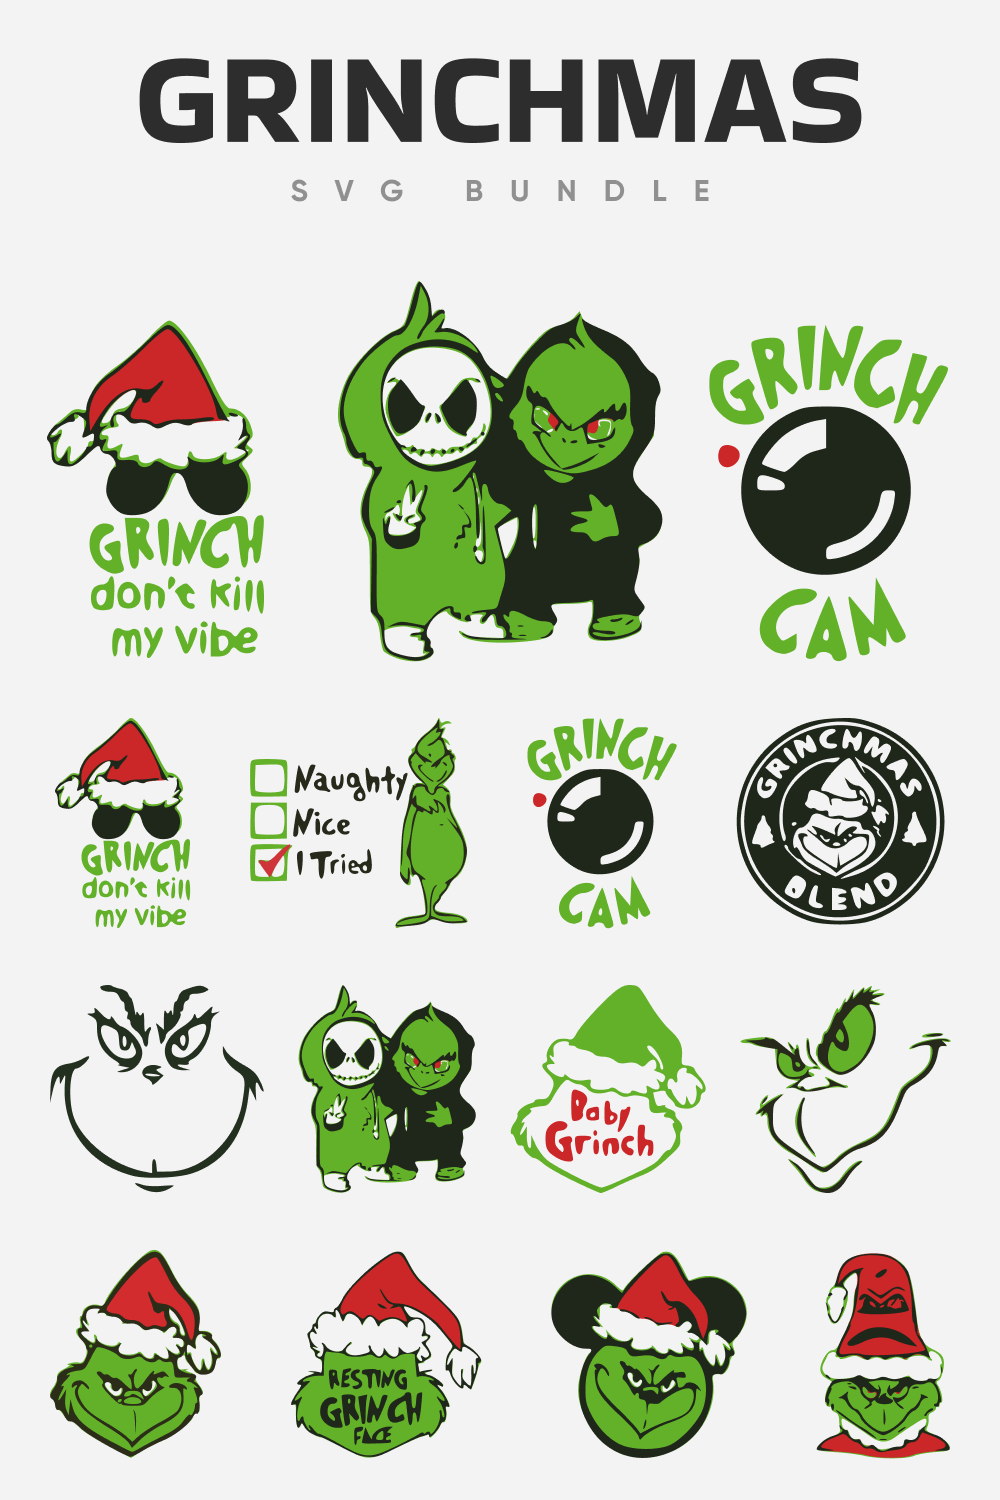 Grinch grin in different variations to create a cheerful mood.